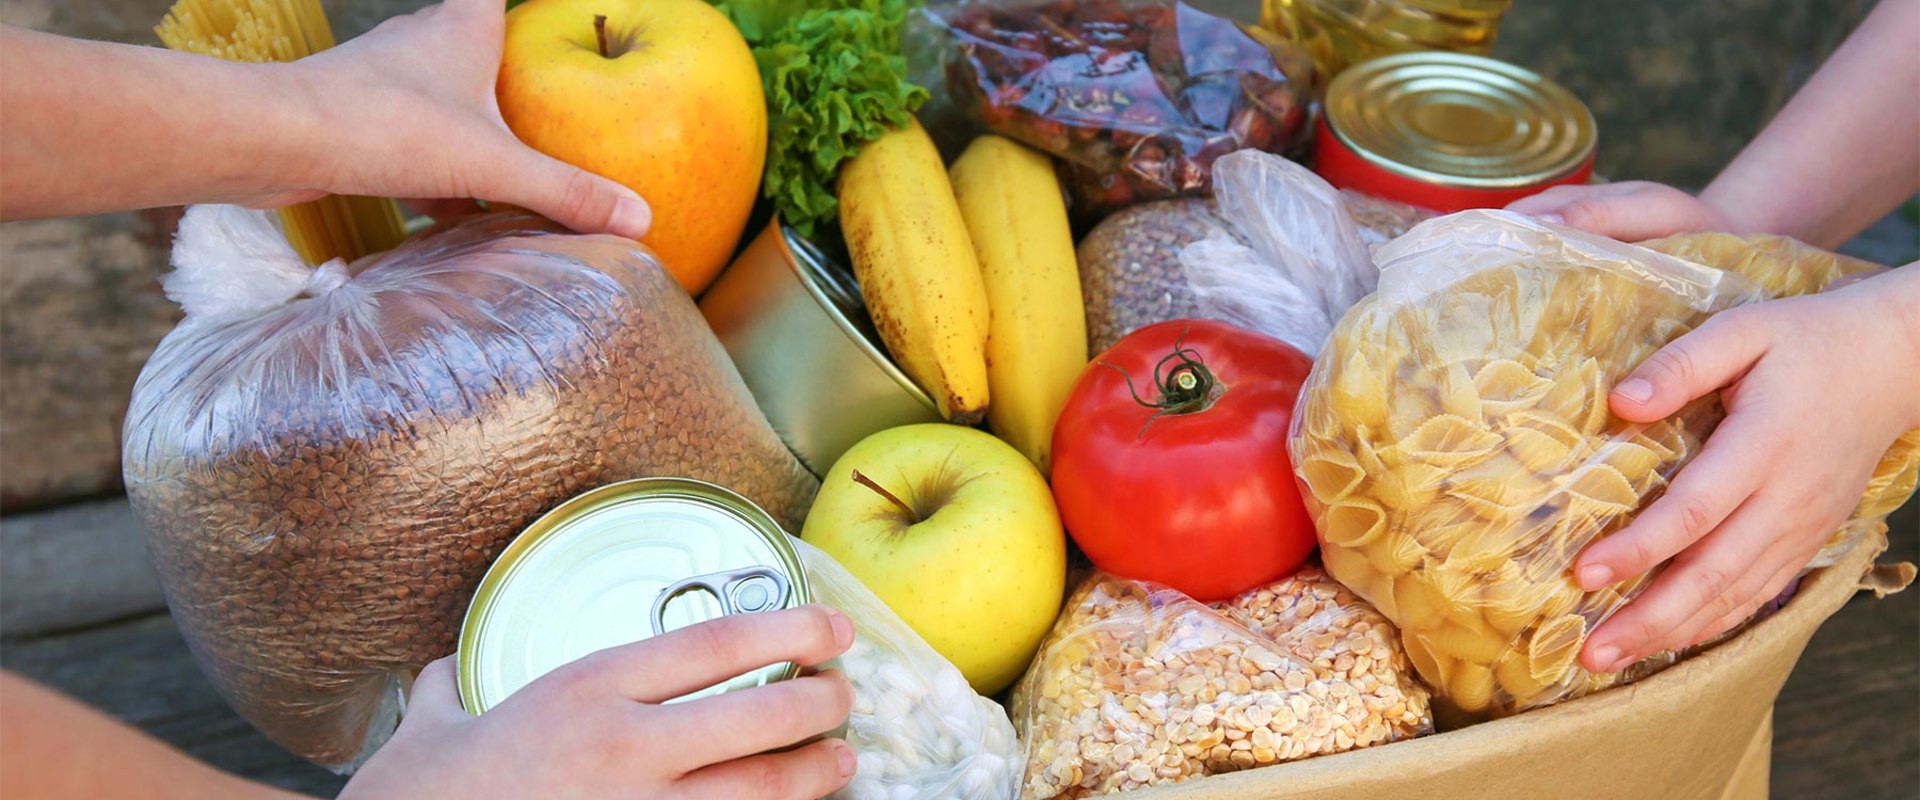 Food Assistance Programs in Los Angeles County: A Comprehensive Guide